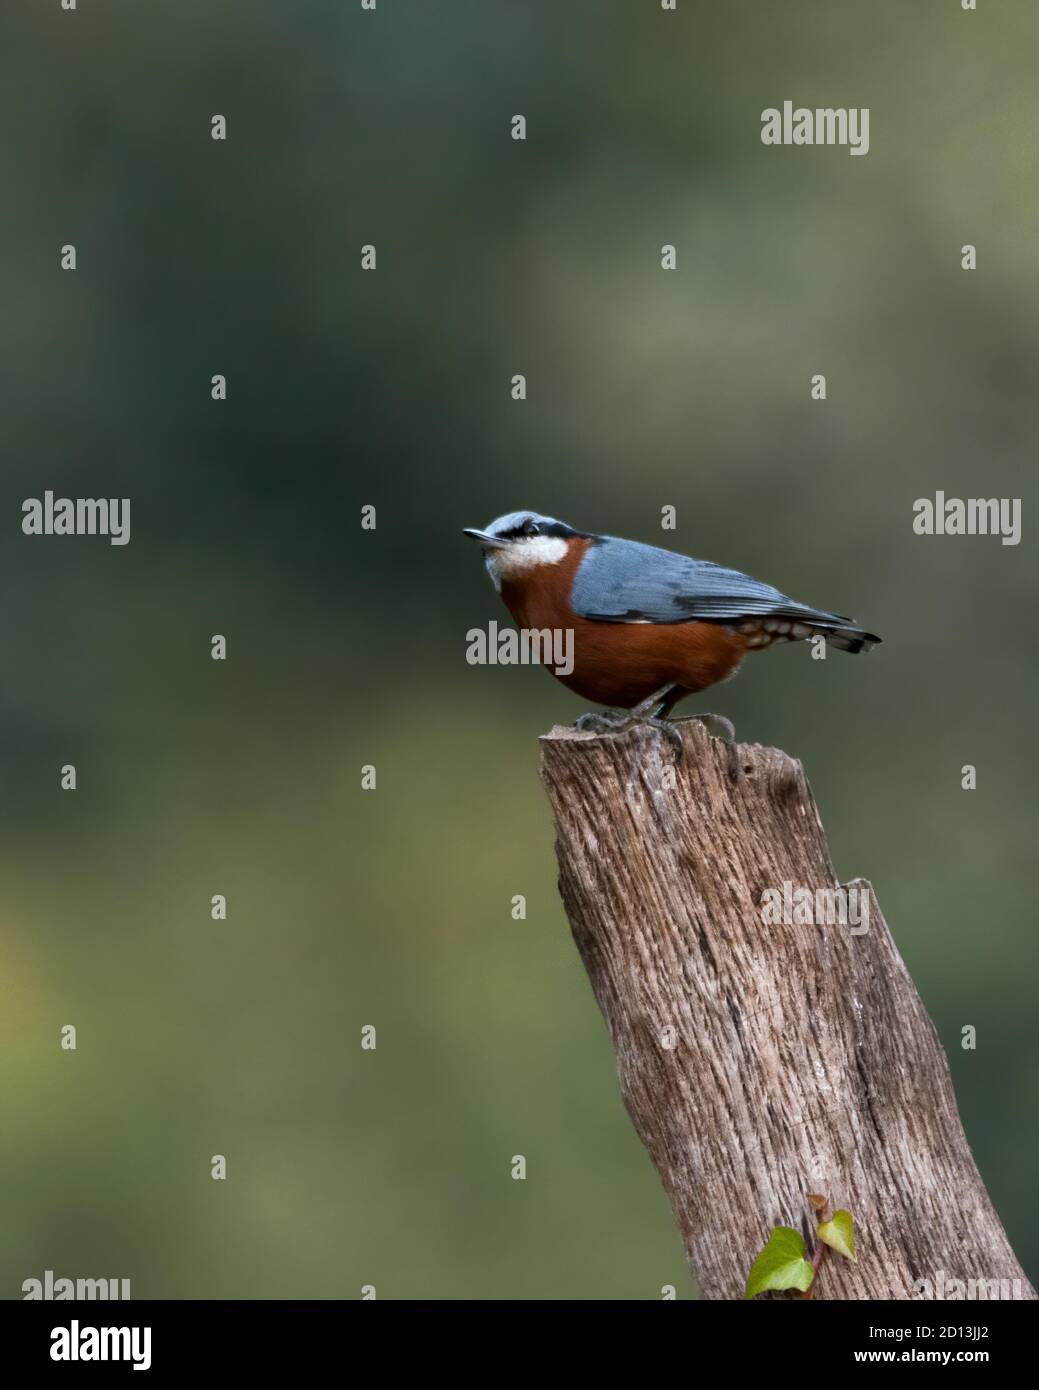 A Chestnut-bellied Nuthatch (Sitta cinnamoventris), perched on a tree log, posing a side view, in the forests of Sattal, Uttarakhand in India. Stock Photo